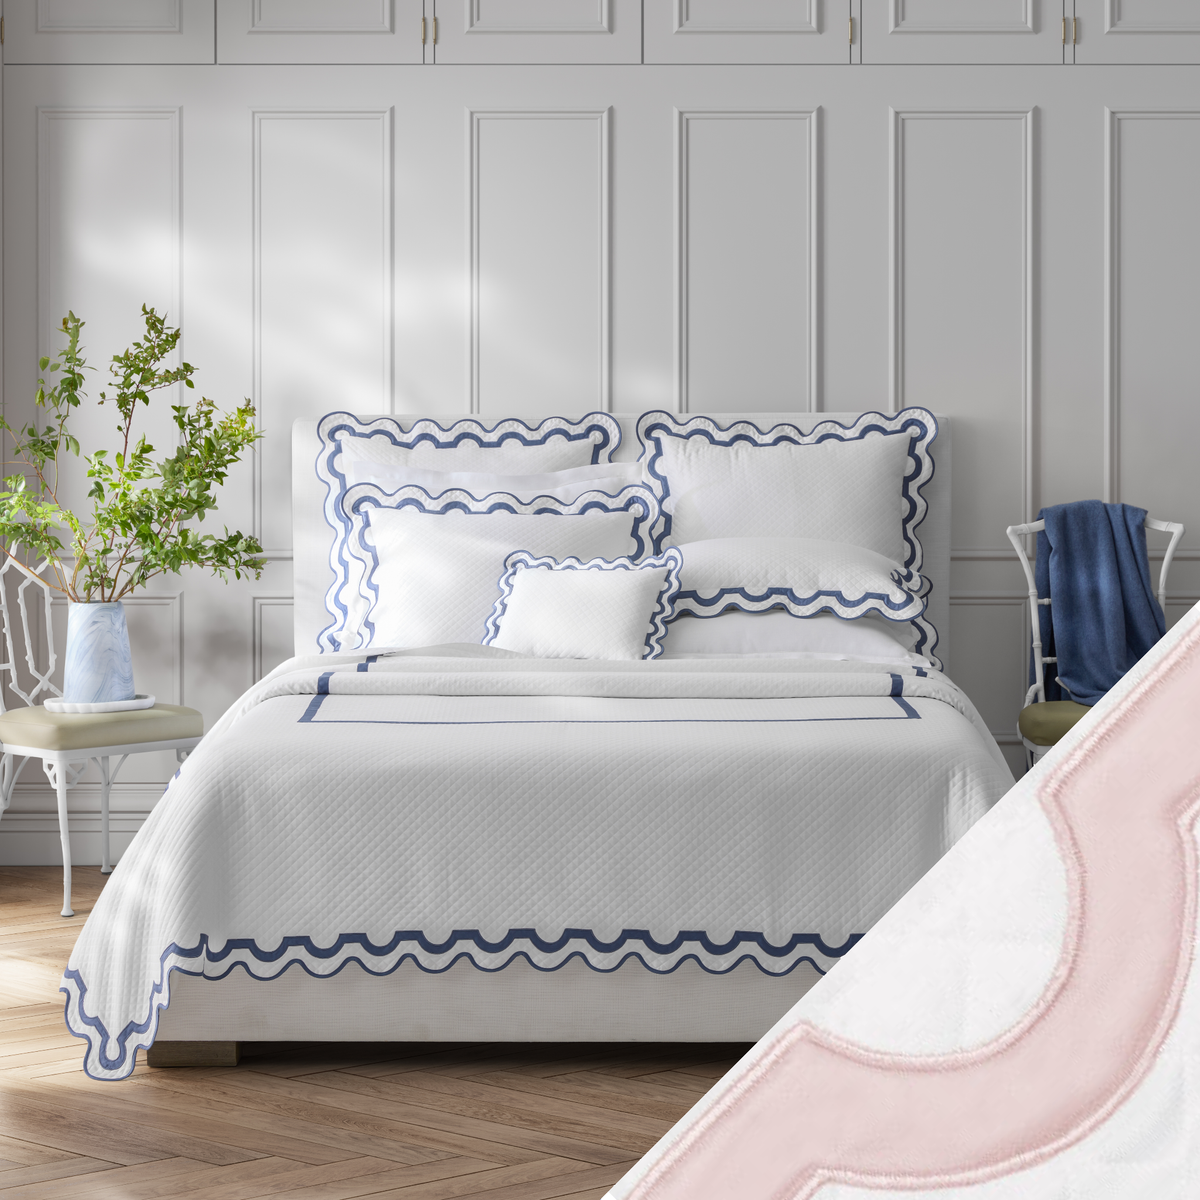 Full Bed Dressed in Matouk Mirasol Matelassé Bedding with Swatch in Pink